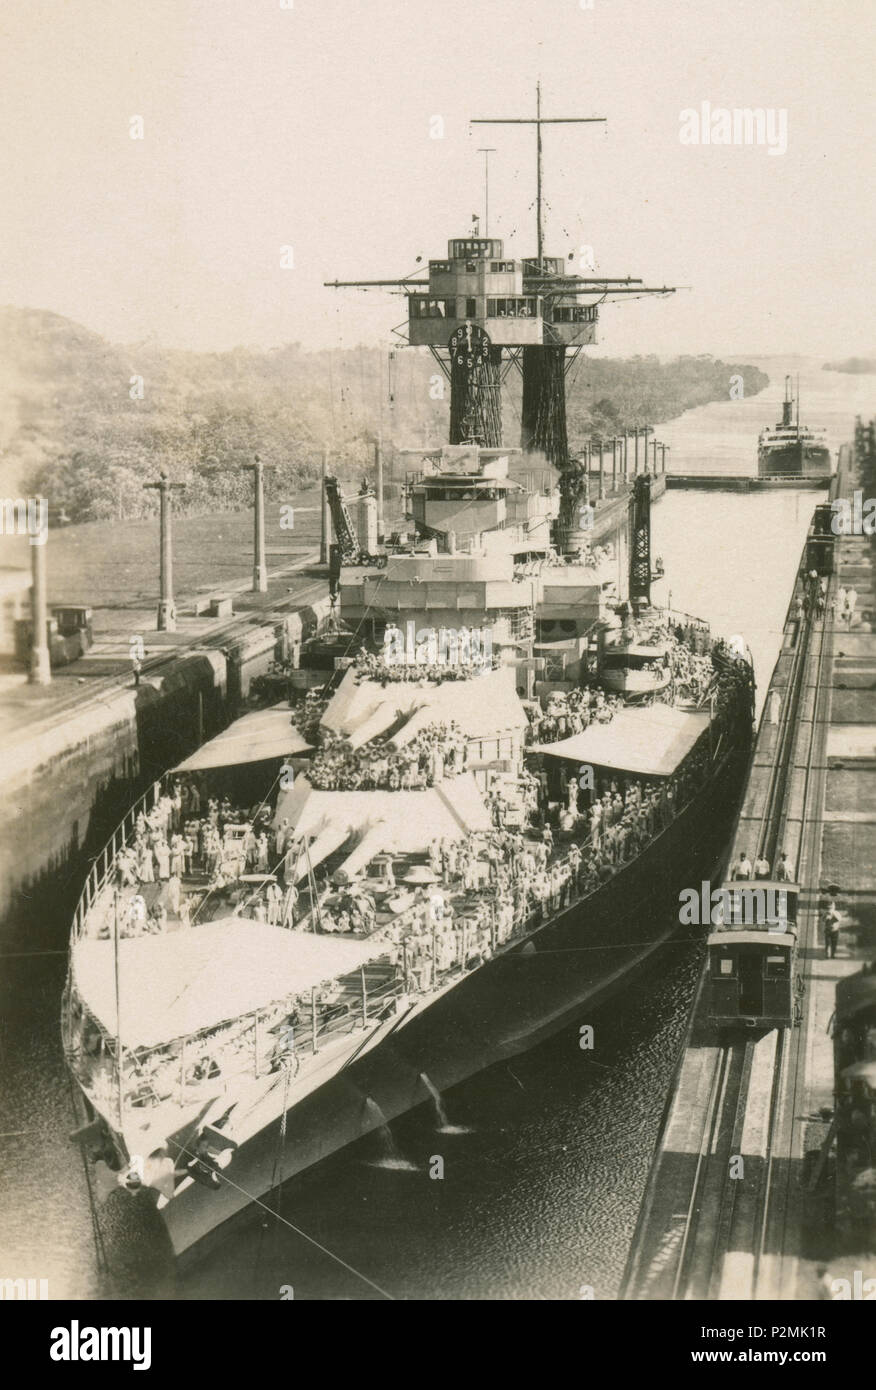 Antique February 13, 1923 photograph, USS Maryland (BB-46) in the Gatun Locks of the Panama Canal. USS Maryland (BB-46), also known as 'Old Mary' or 'Fighting Mary' to her crewmates, was a Colorado-class battleship. SOURCE: ORIGINAL PHOTOGRAPH Stock Photo